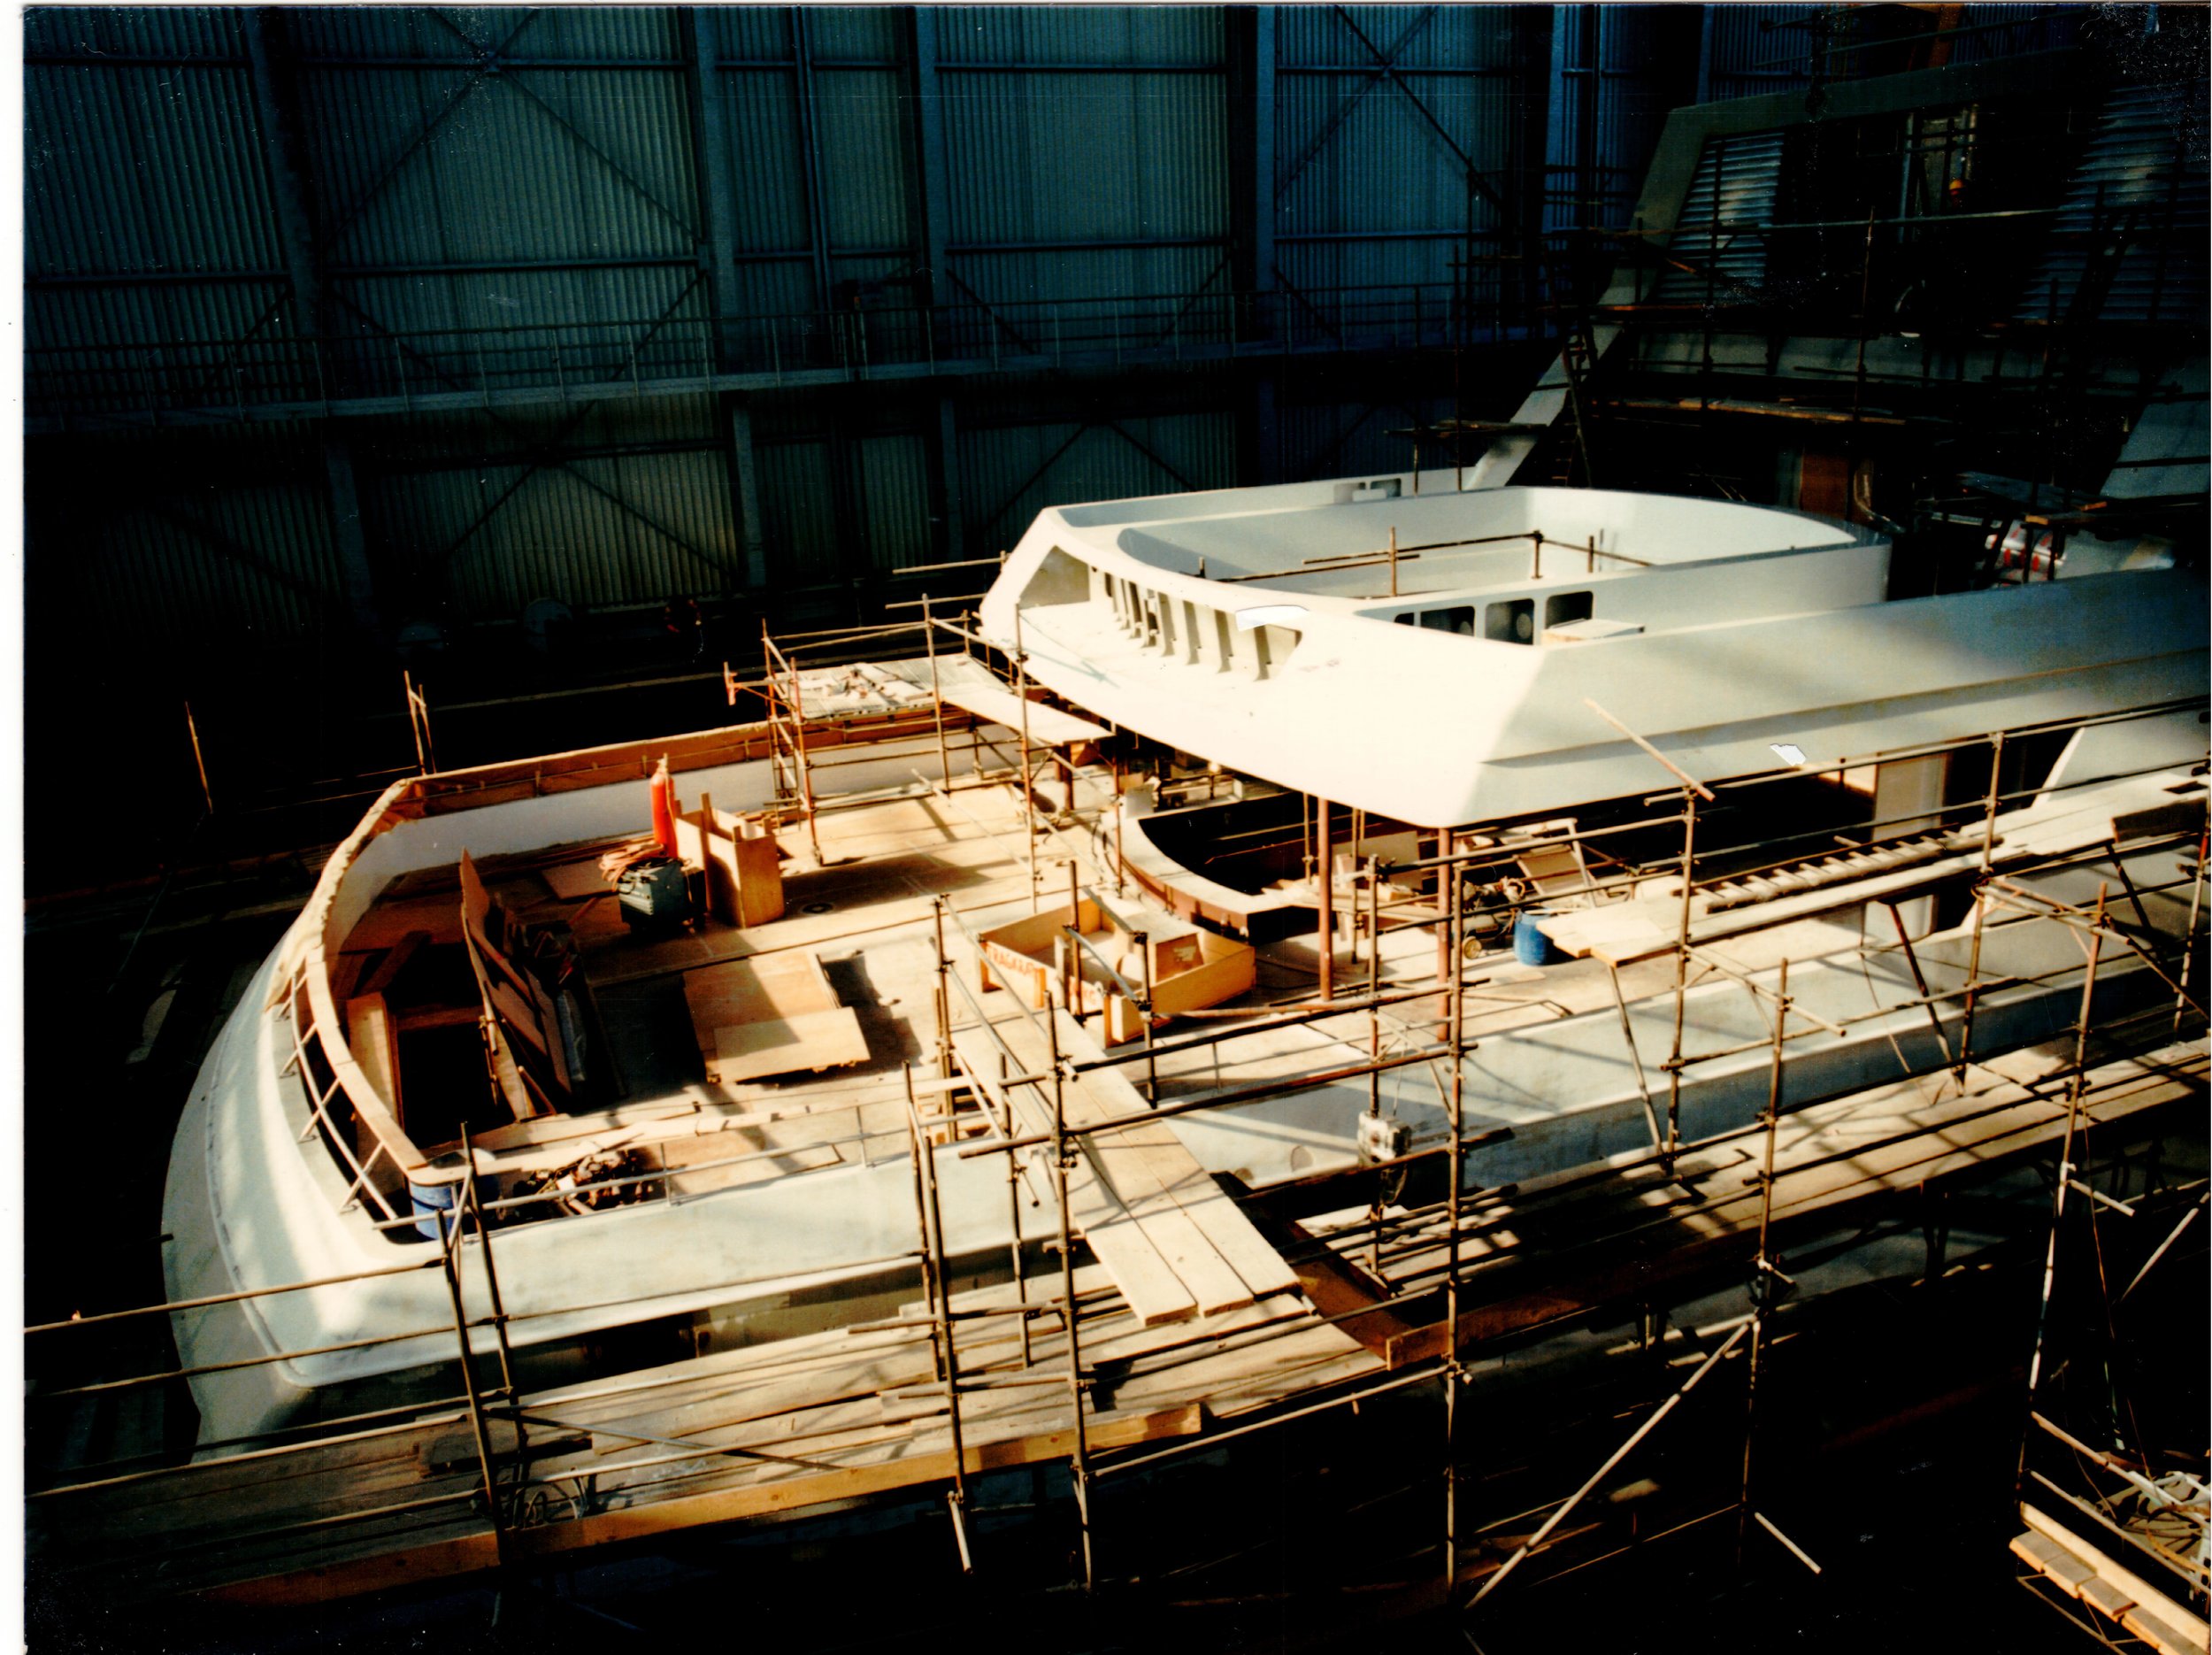  Yacht constructed at Blohm &amp; Voss shipyard in Hamburg, Germany 